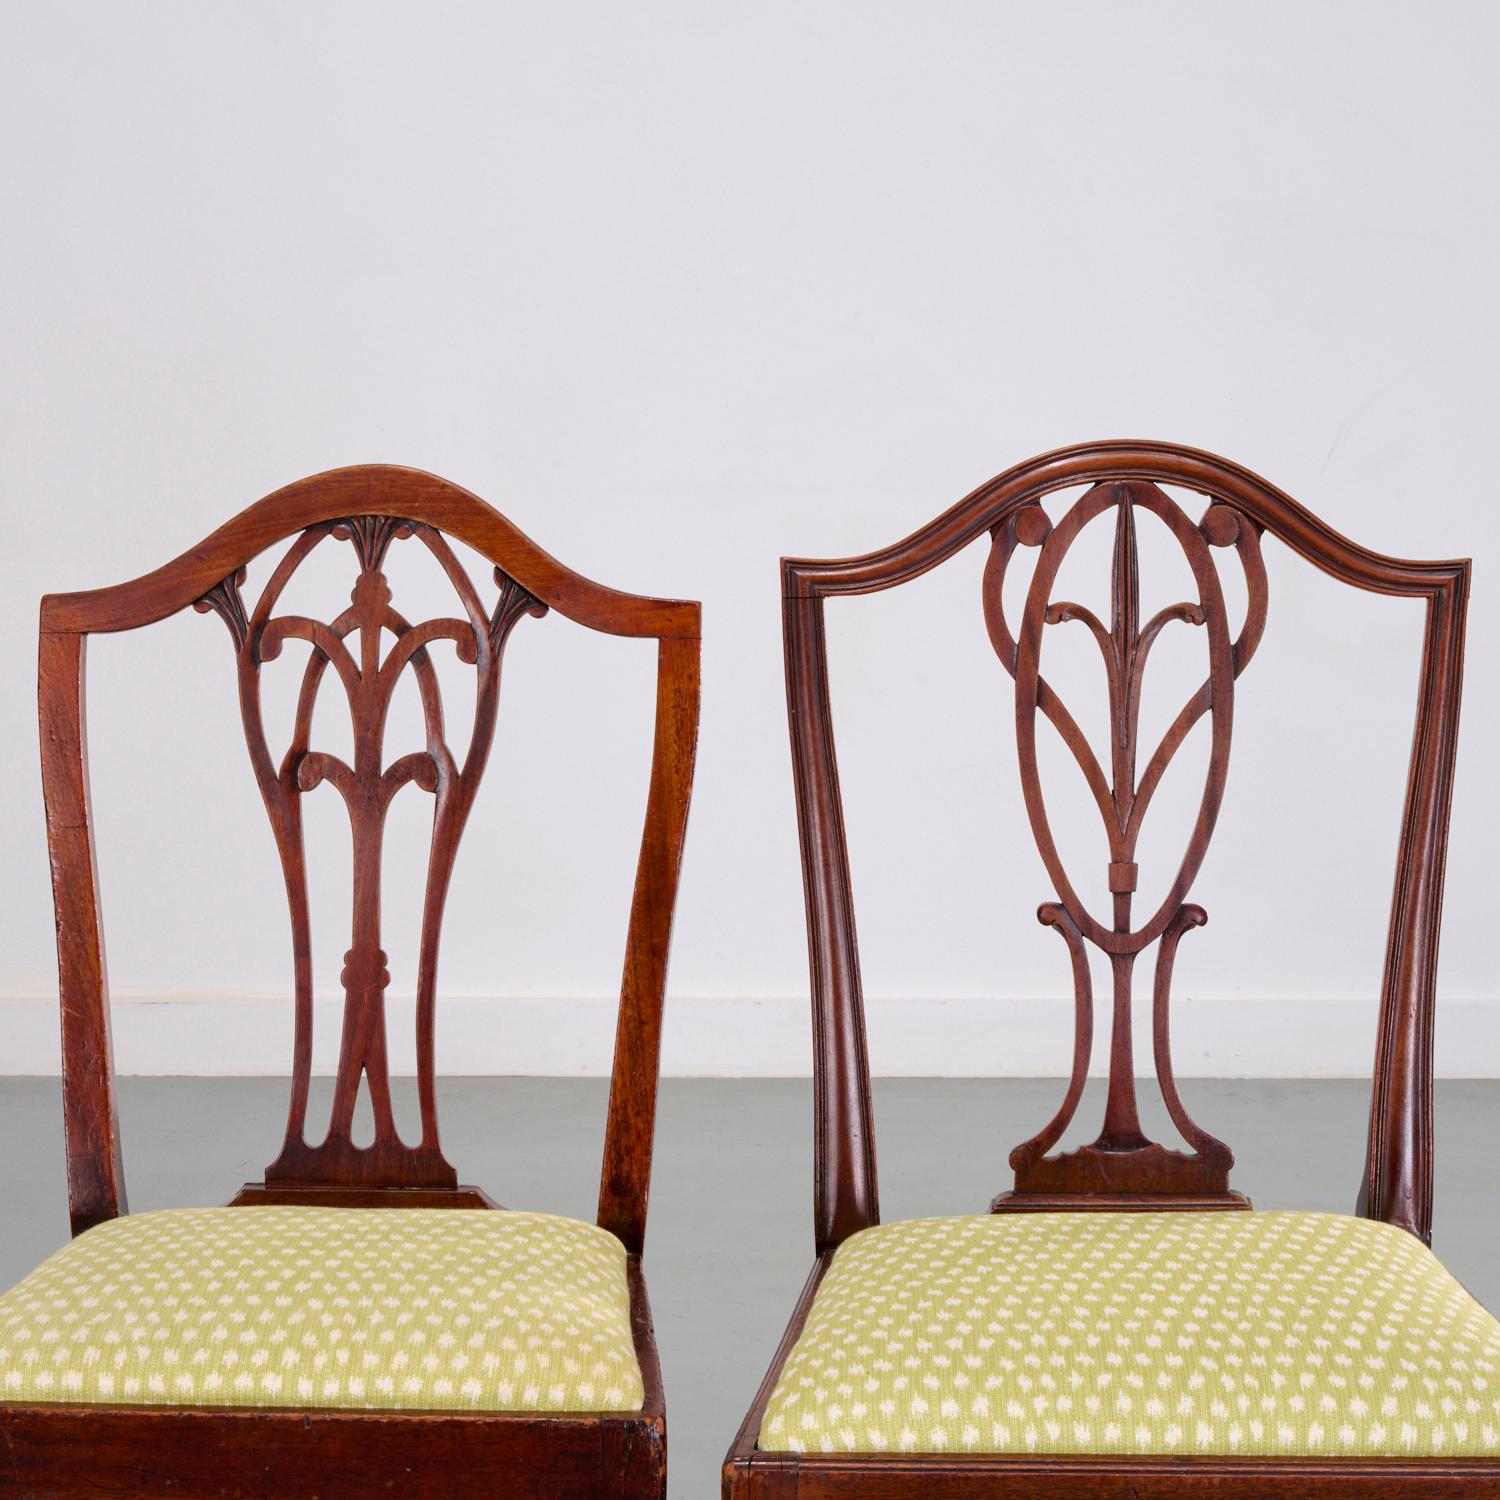 19th c. and later, England, an assembled set of dining chairs in the Hepplewhite style, (6) side chairs with pierced splat backs, and (6) side chairs of similar design, all of mahogany with pale green and cream linen upholstered drop in seats.